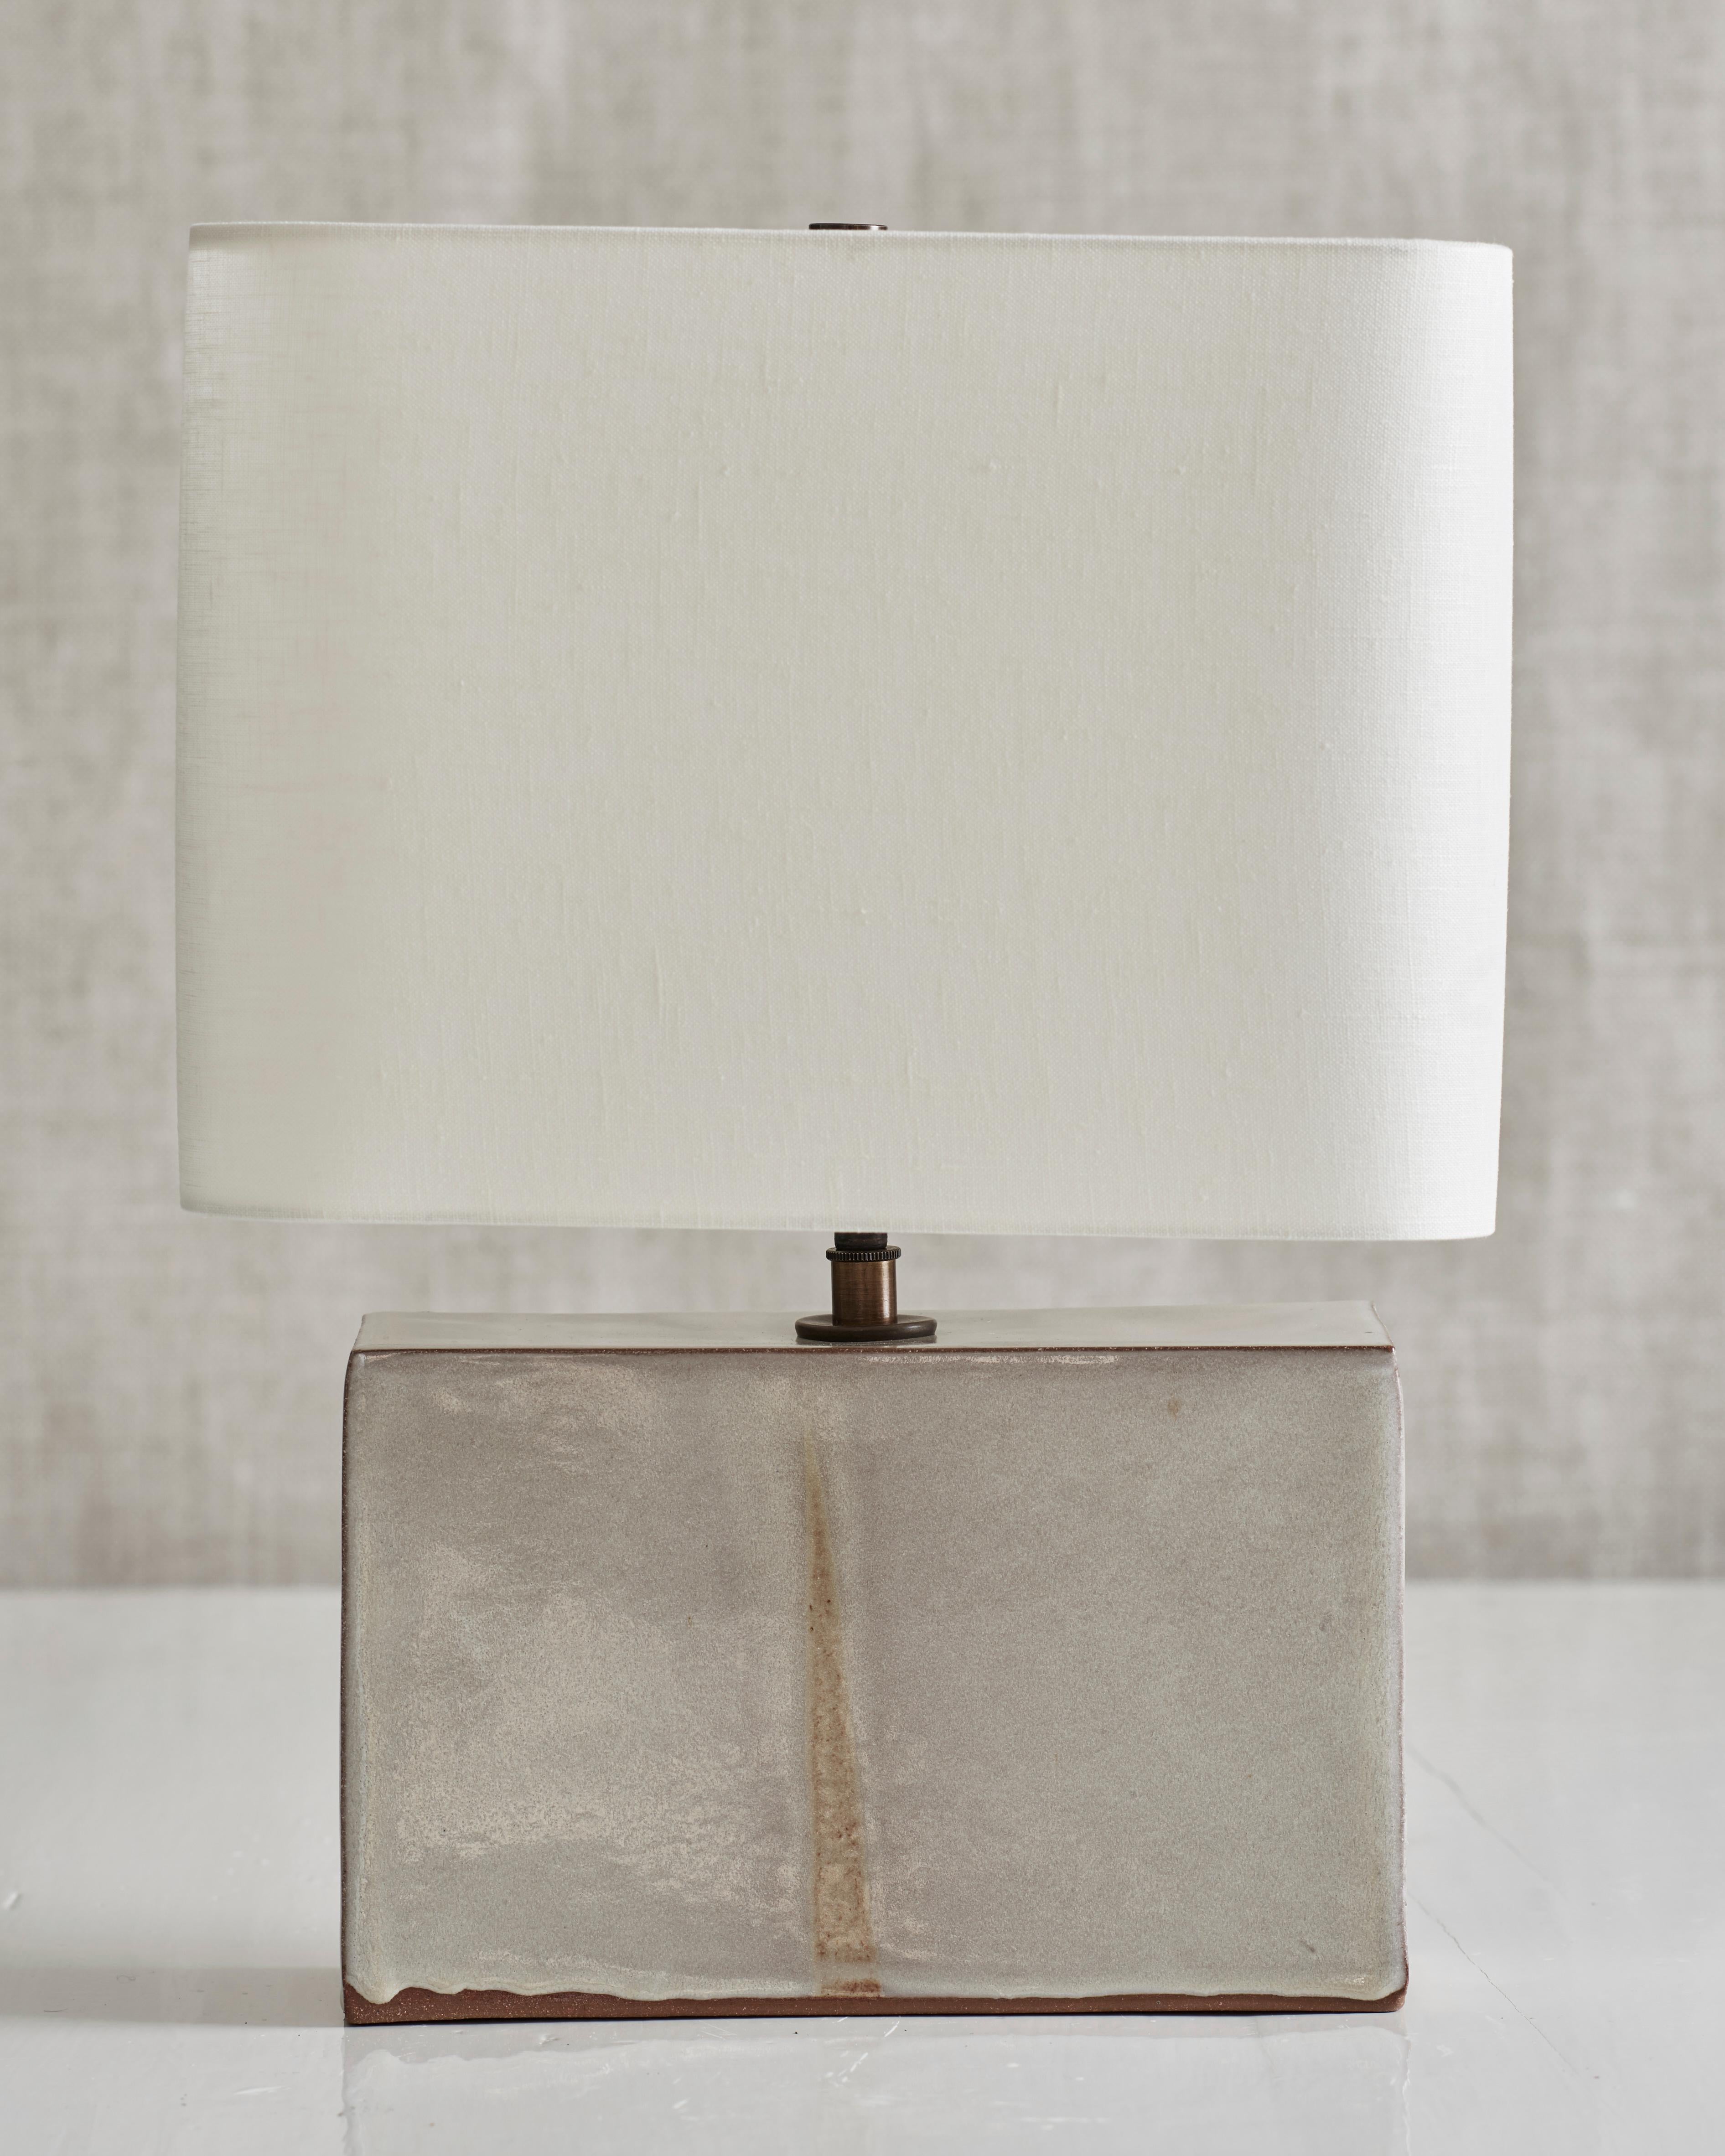 Handmade stoneware slab construction. Lamps are individually crafted and one of a kind.

White glaze. Antique brass fittings with braided black silk cord and off-white linen shade.

Measures: Box height 6.5”
Box width 10”
Box depth